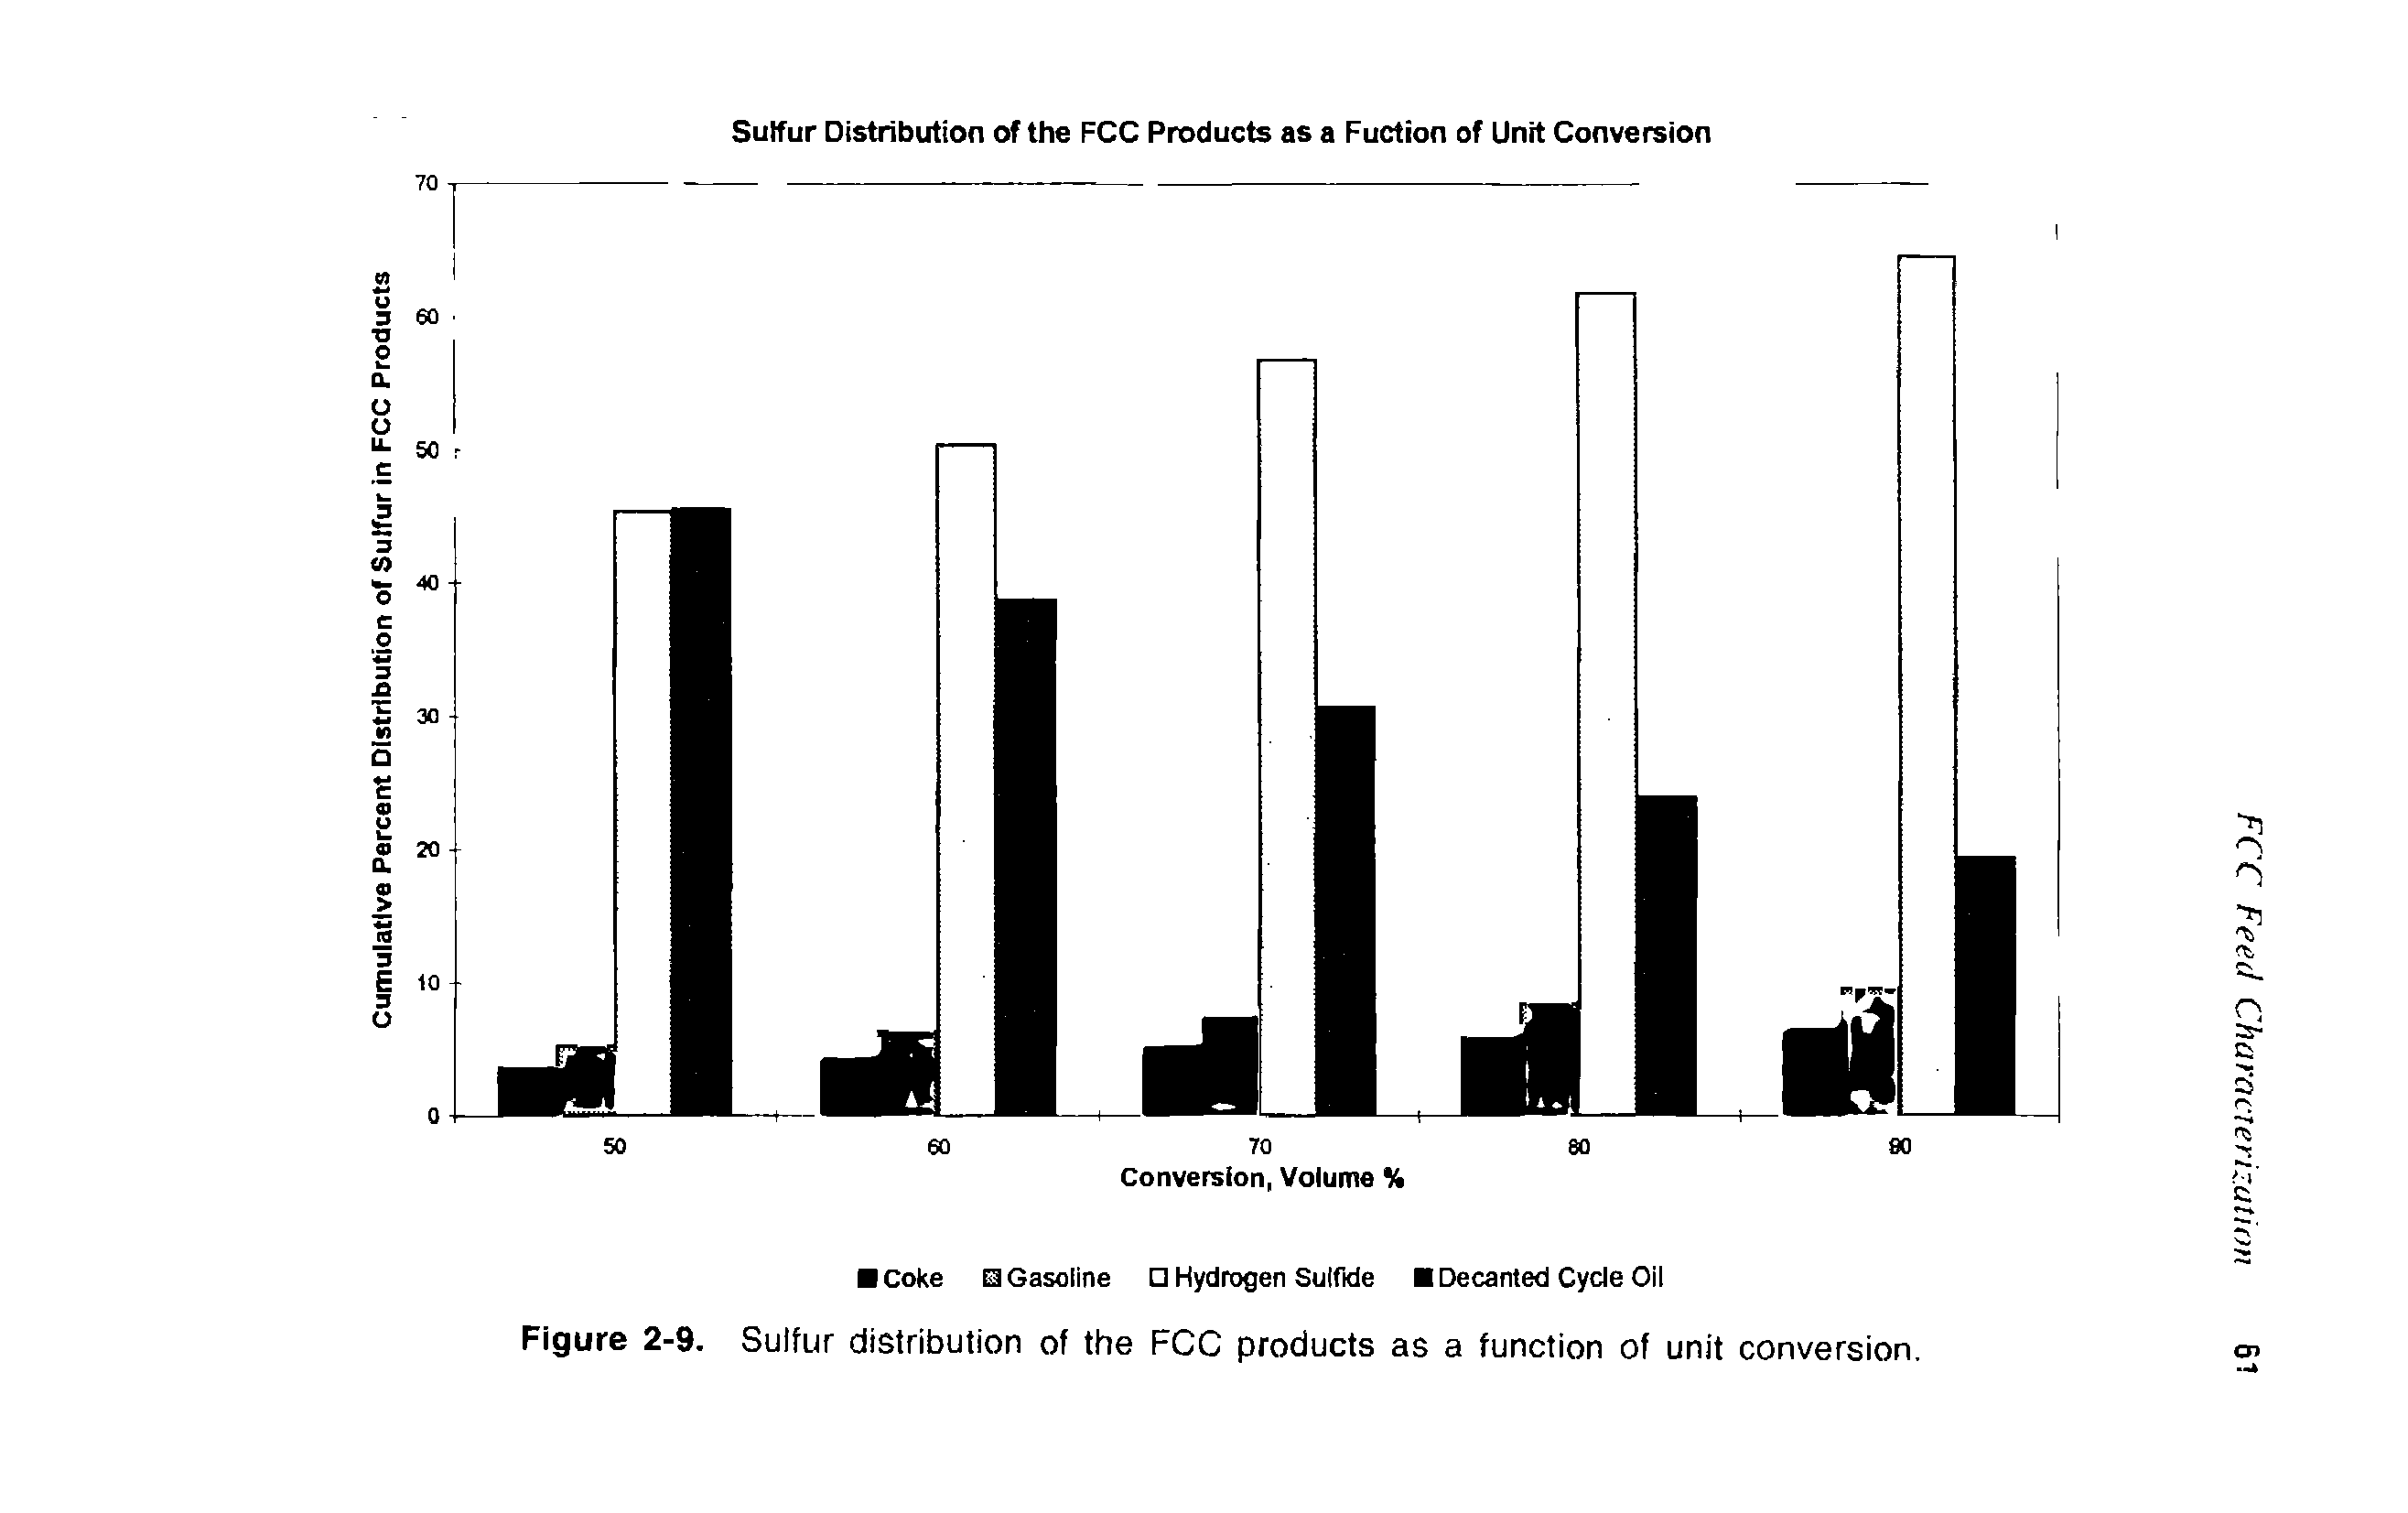 Figure 2-9. Sulfur distribution of the FCC products as a function of unit conversion.